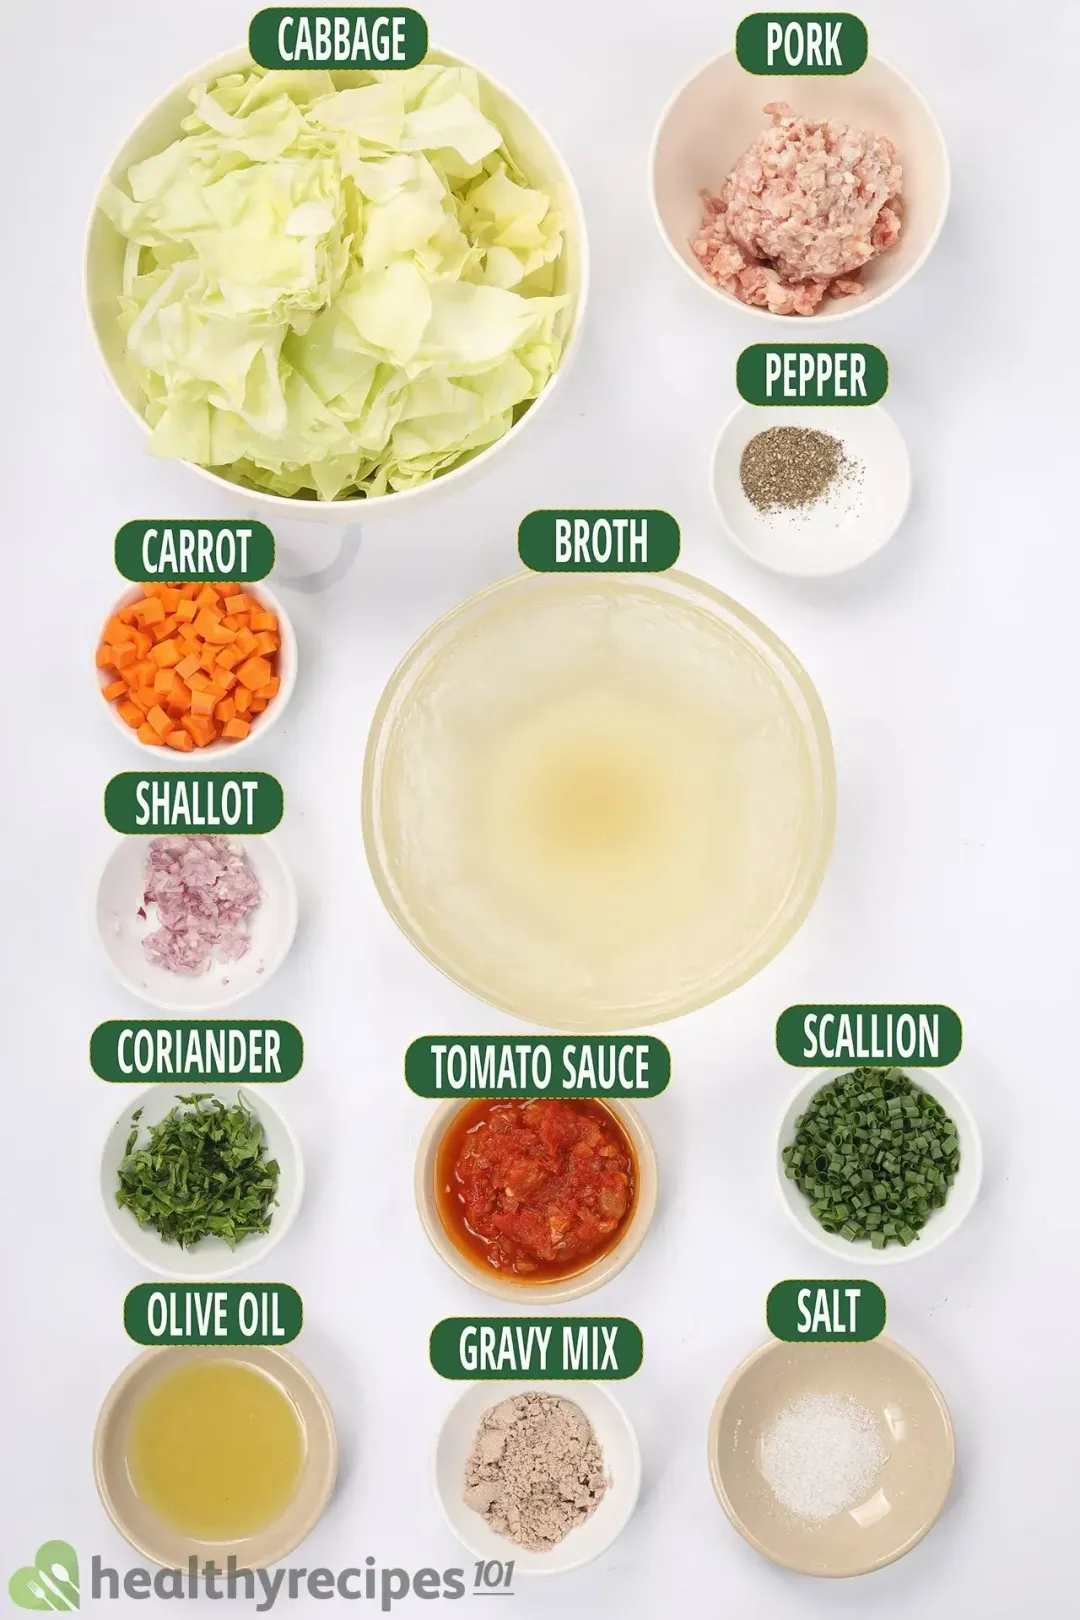 Main Ingredients for Cabbage Soup